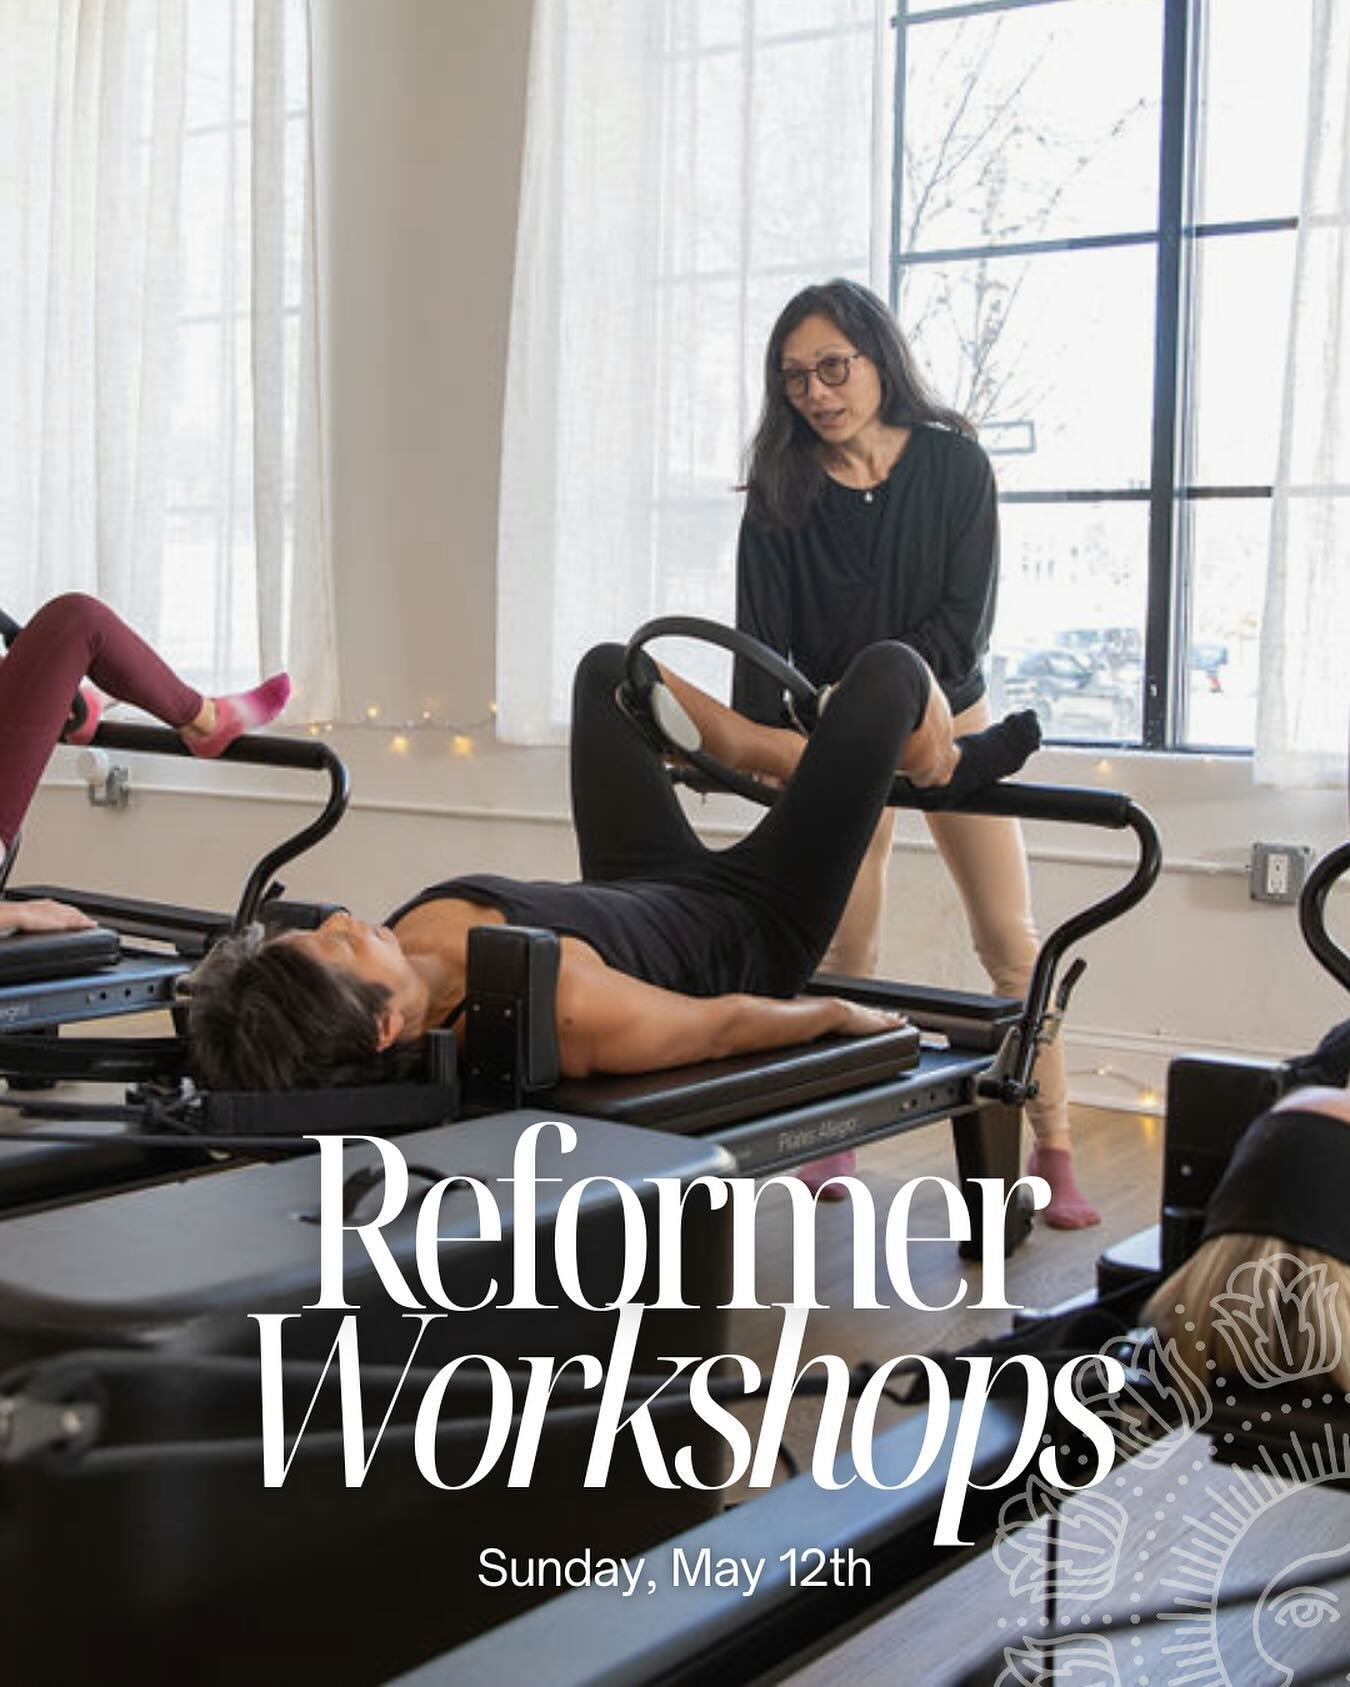 THIS weekend! Join @chaeyang1 for two Pilates Reformer Workshops on Sunday, May 12th at Corinthian Ave⁠ 🌟✨⁠
⁠
New to Reformer Pilates? From 12:45 - 1:45 PM try out this beginner-friendly introduction. Learn the ins and outs of the Reformer and exper